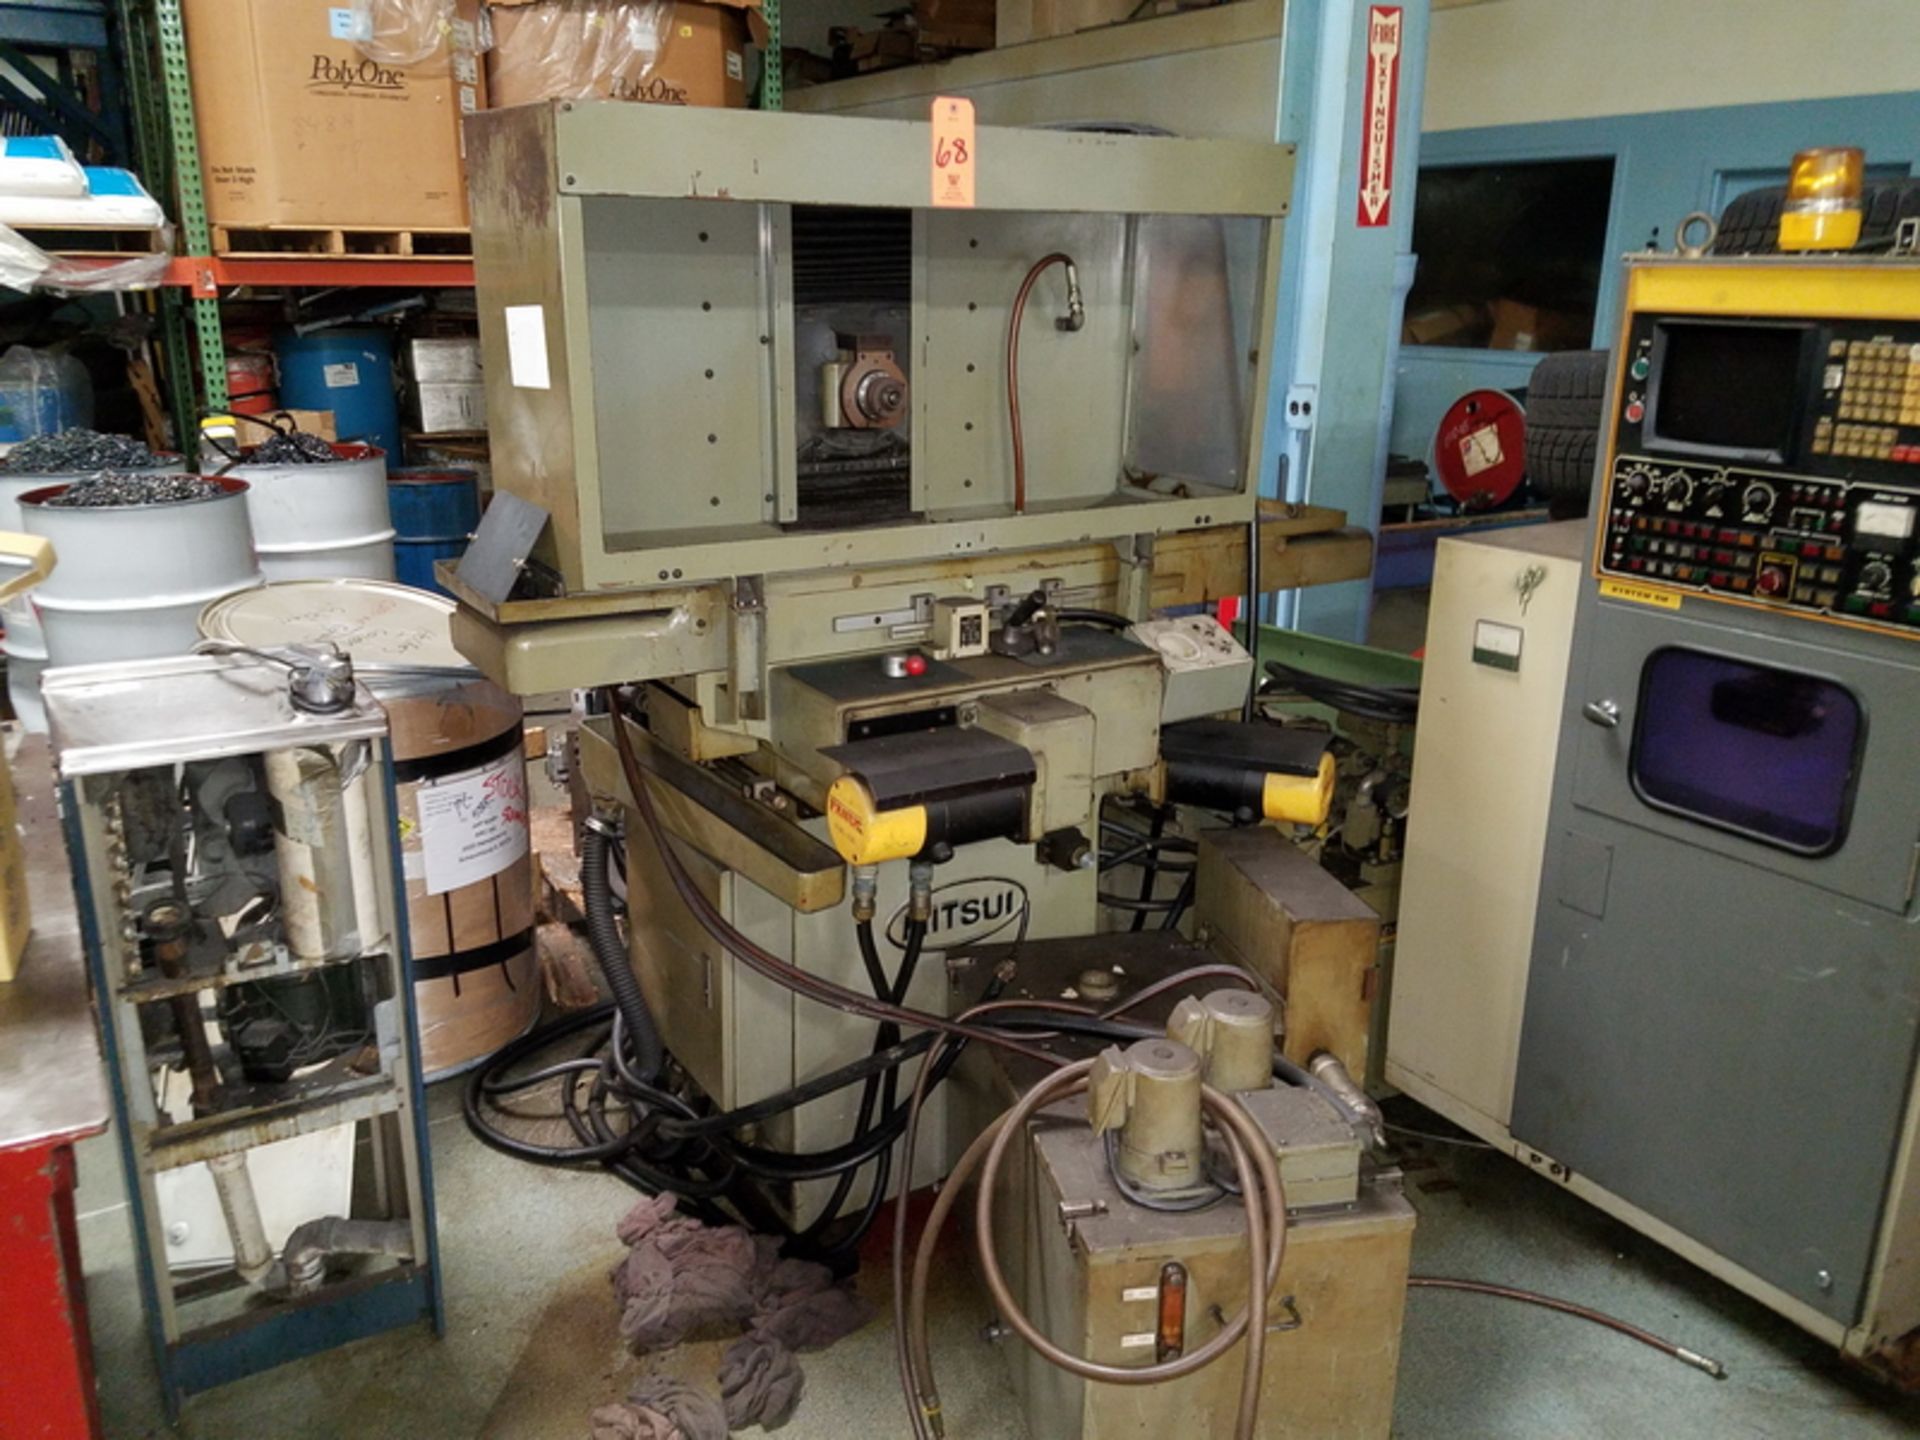 Mitsui 8 in. x 18 in. Model N250C Hydraulic Surface Grinder, S/N: 82070031 (1982); 3,500 RPM, 180